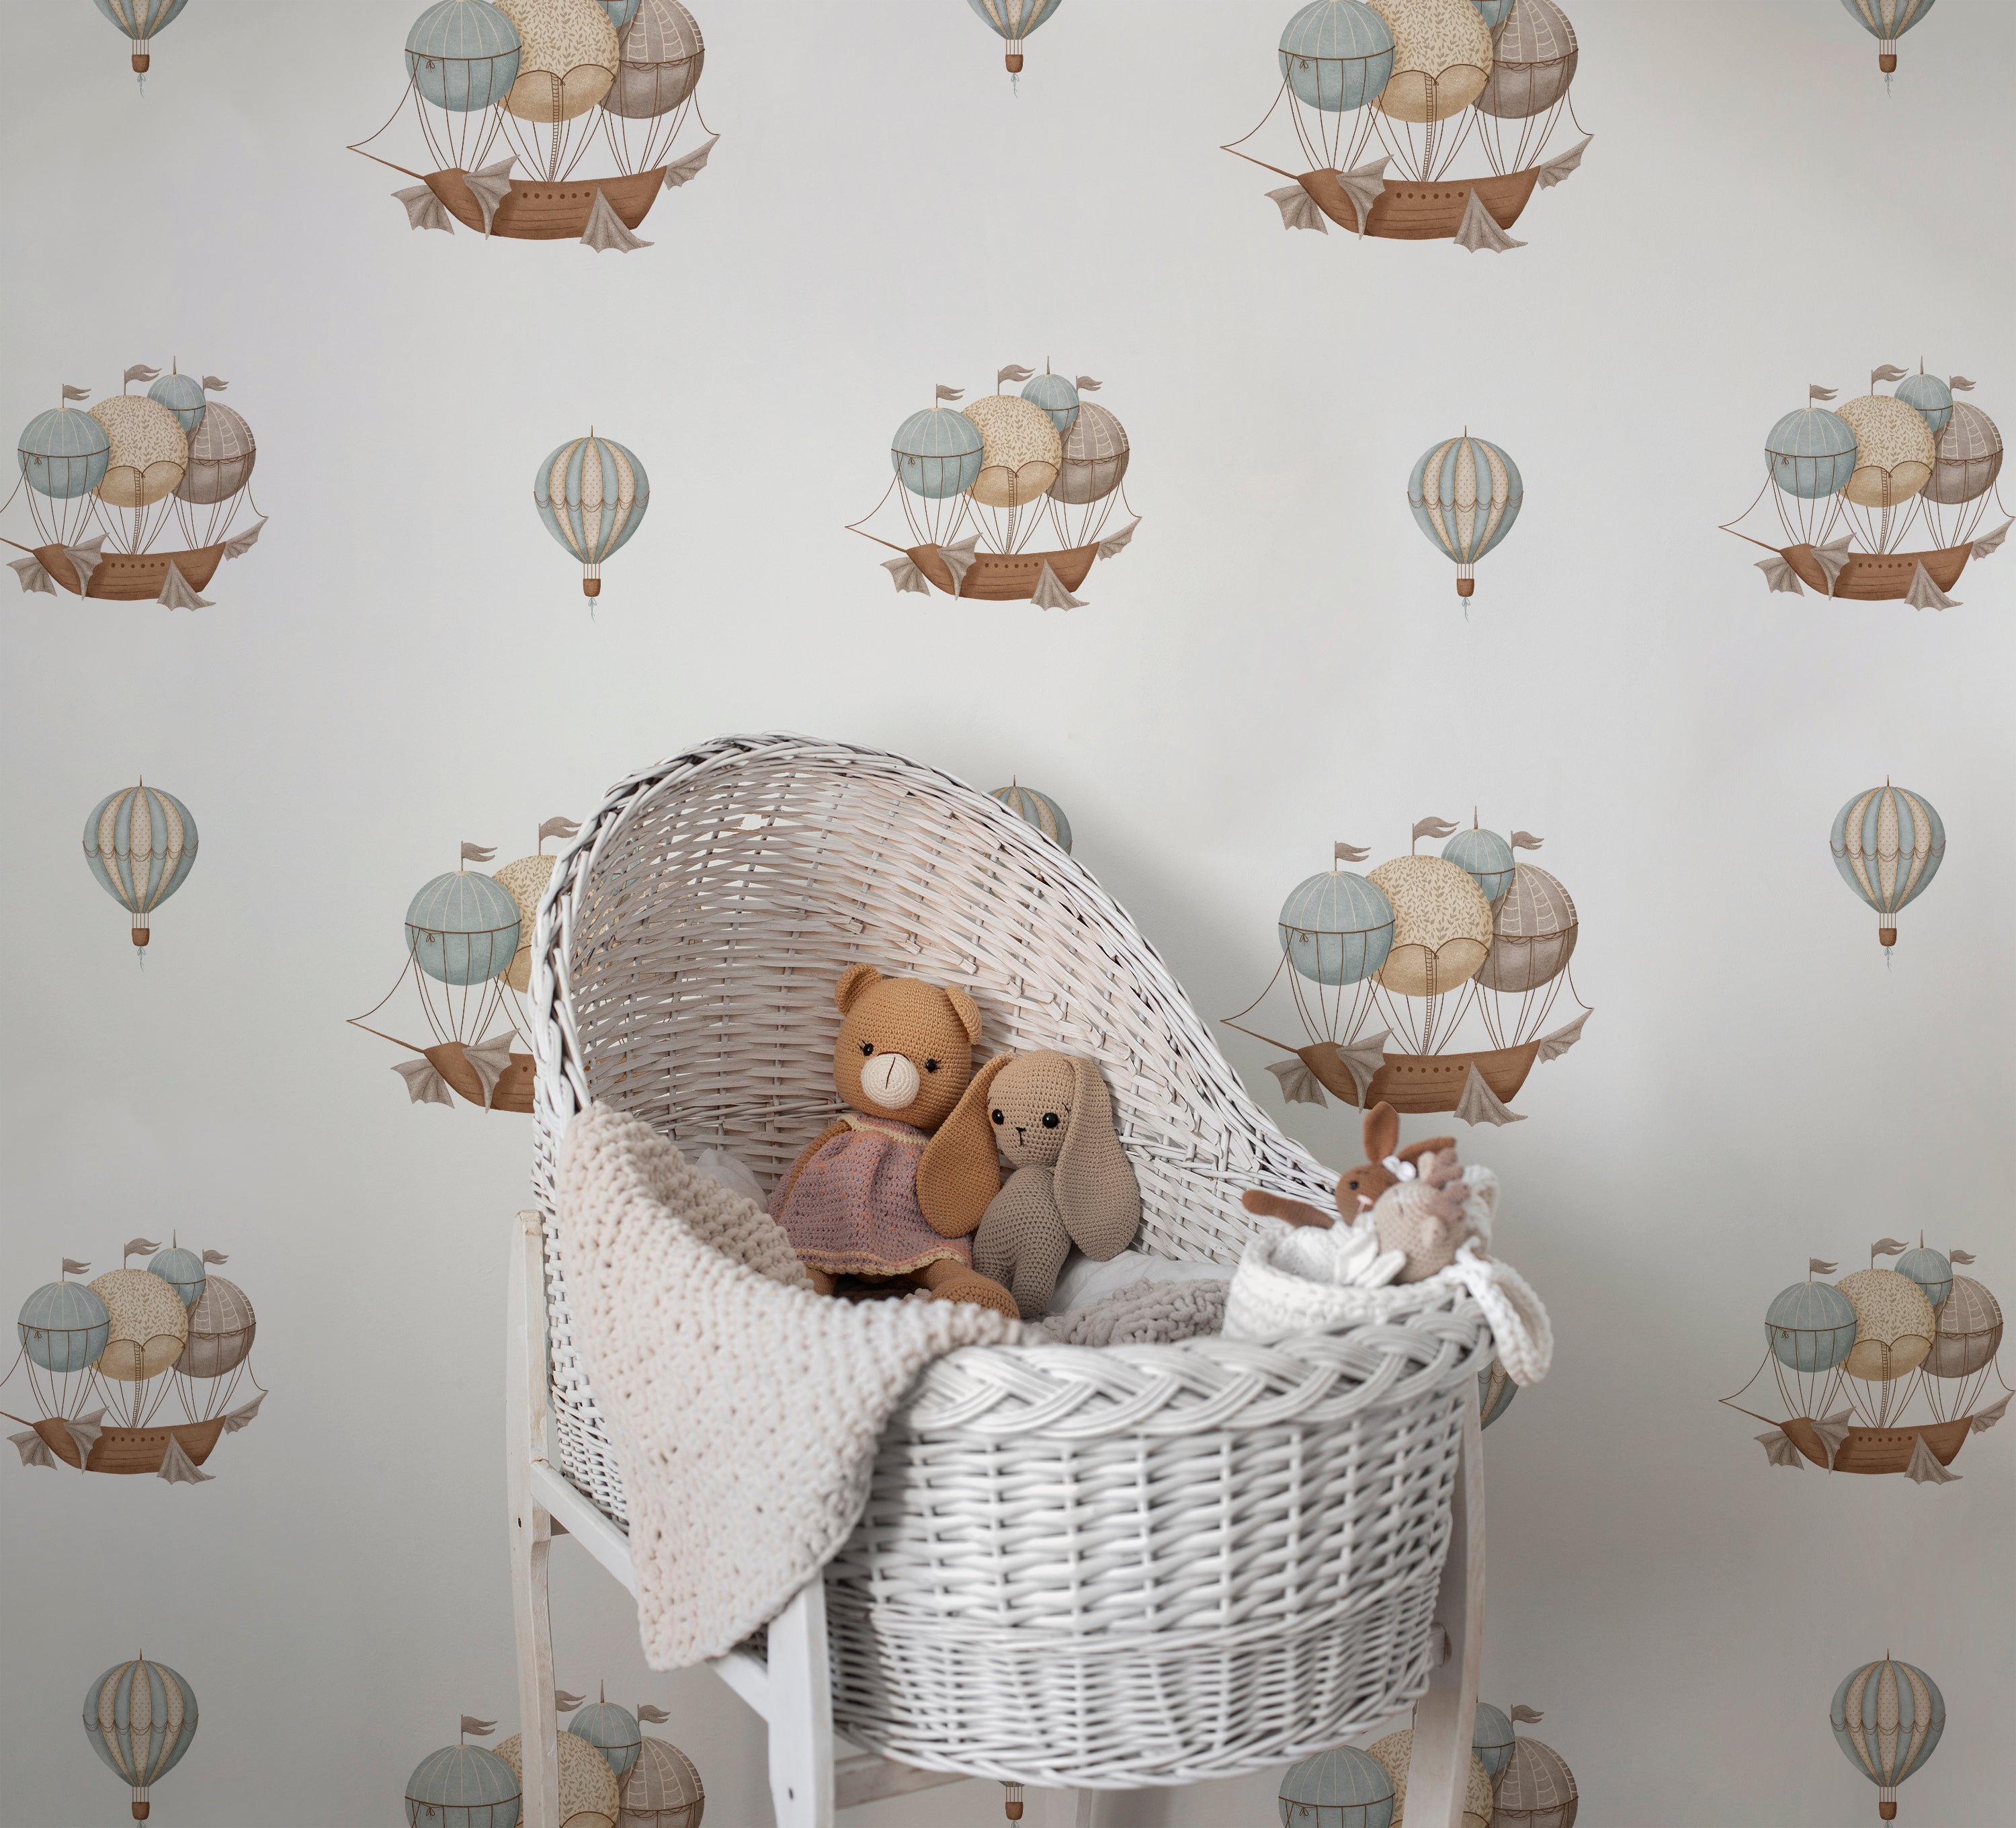 Nautical Balloons Wallpaper in a nursery with a wicker bassinet, enhancing a cozy, whimsical atmosphere.